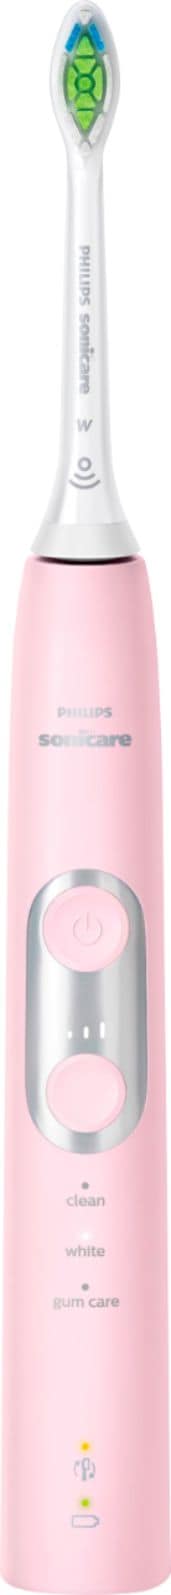 Philips Sonicare - ProtectiveClean 6100 Rechargeable Toothbrush - Pastel Pink_0